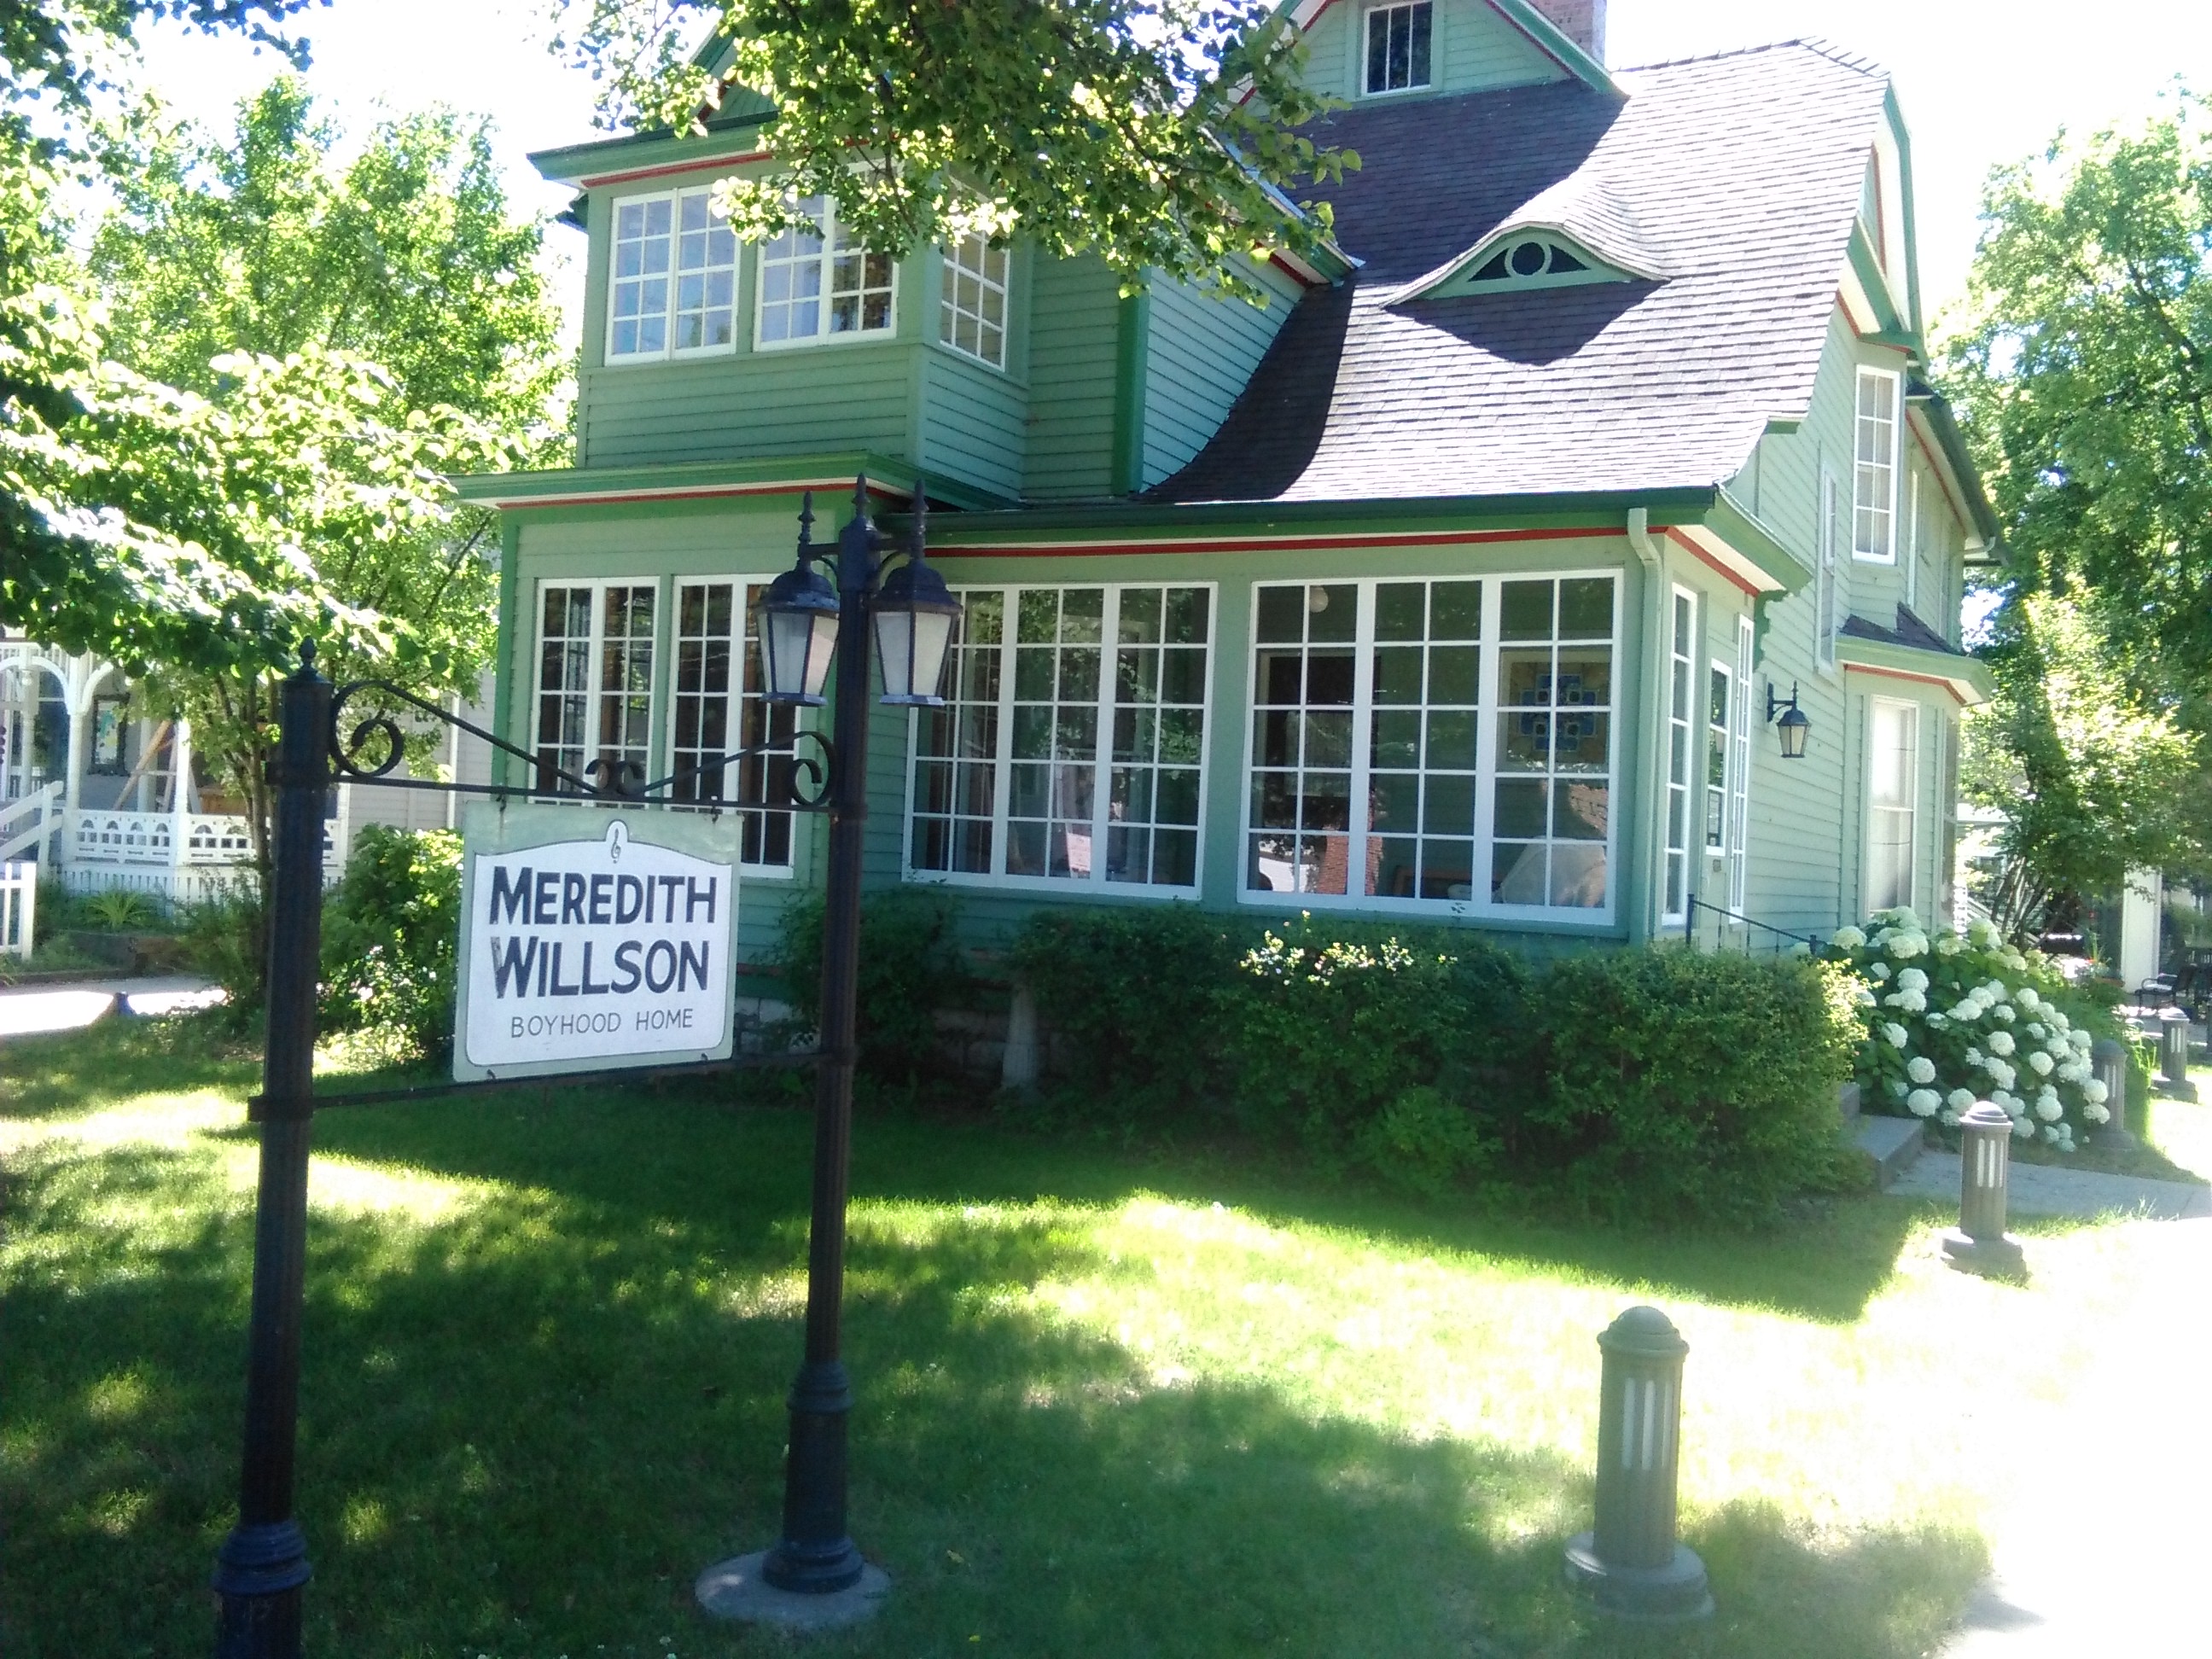 The home were Robert Meredith Willson was born and wrote the movie Music Man